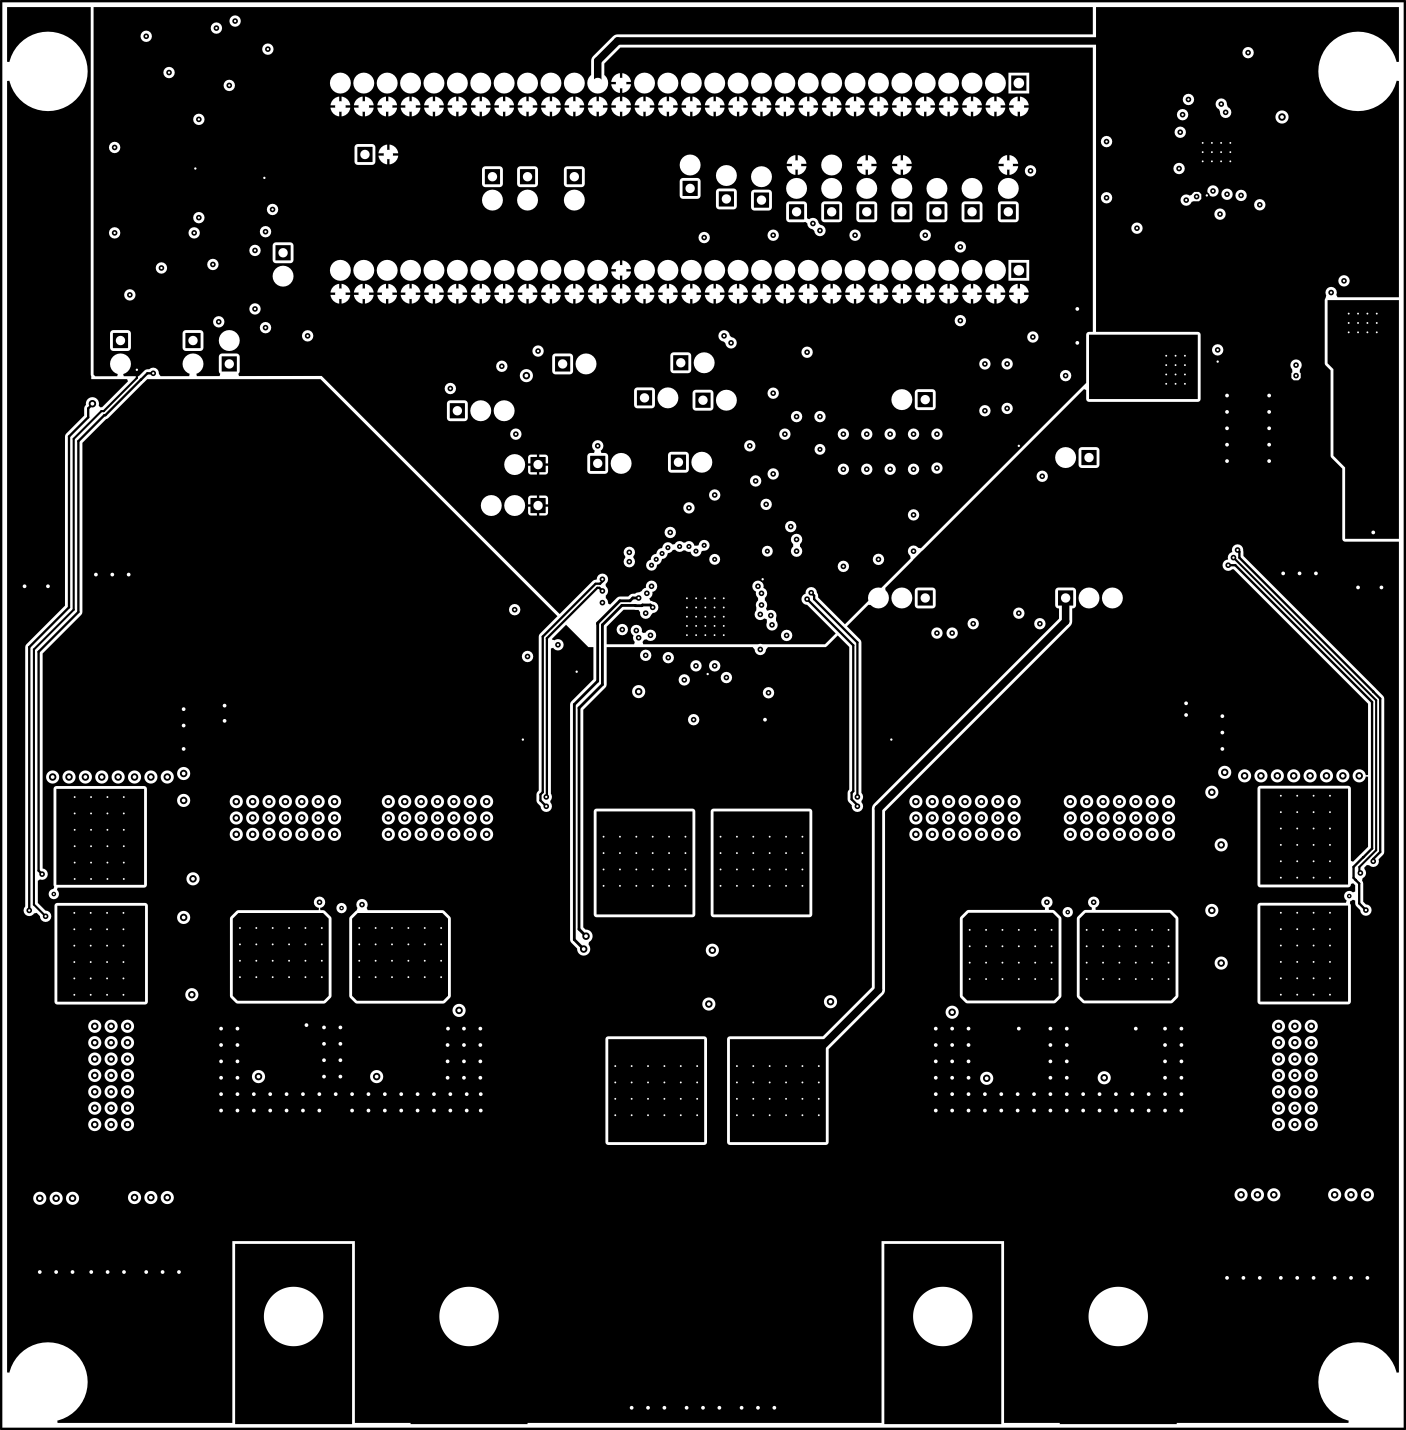 pcb_layer_06_inner_layer_4_snvu543.png